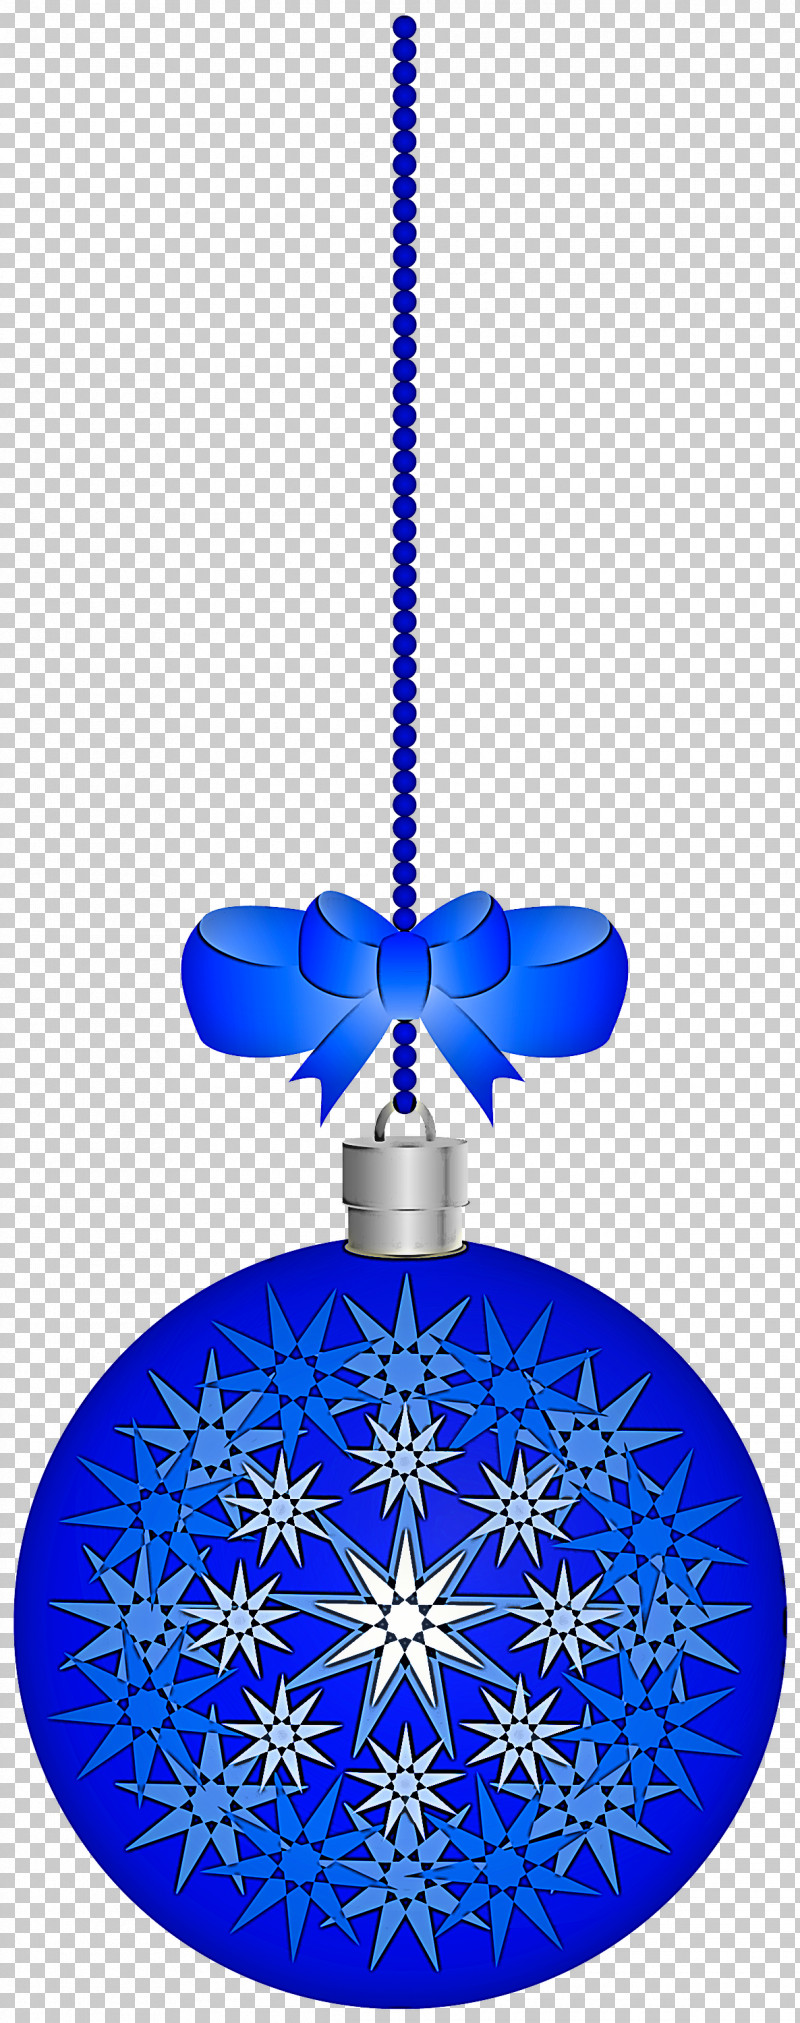 Christmas Ornament PNG, Clipart, Blue, Christmas Ornament, Cobalt Blue, Electric Blue, Holiday Ornament Free PNG Download